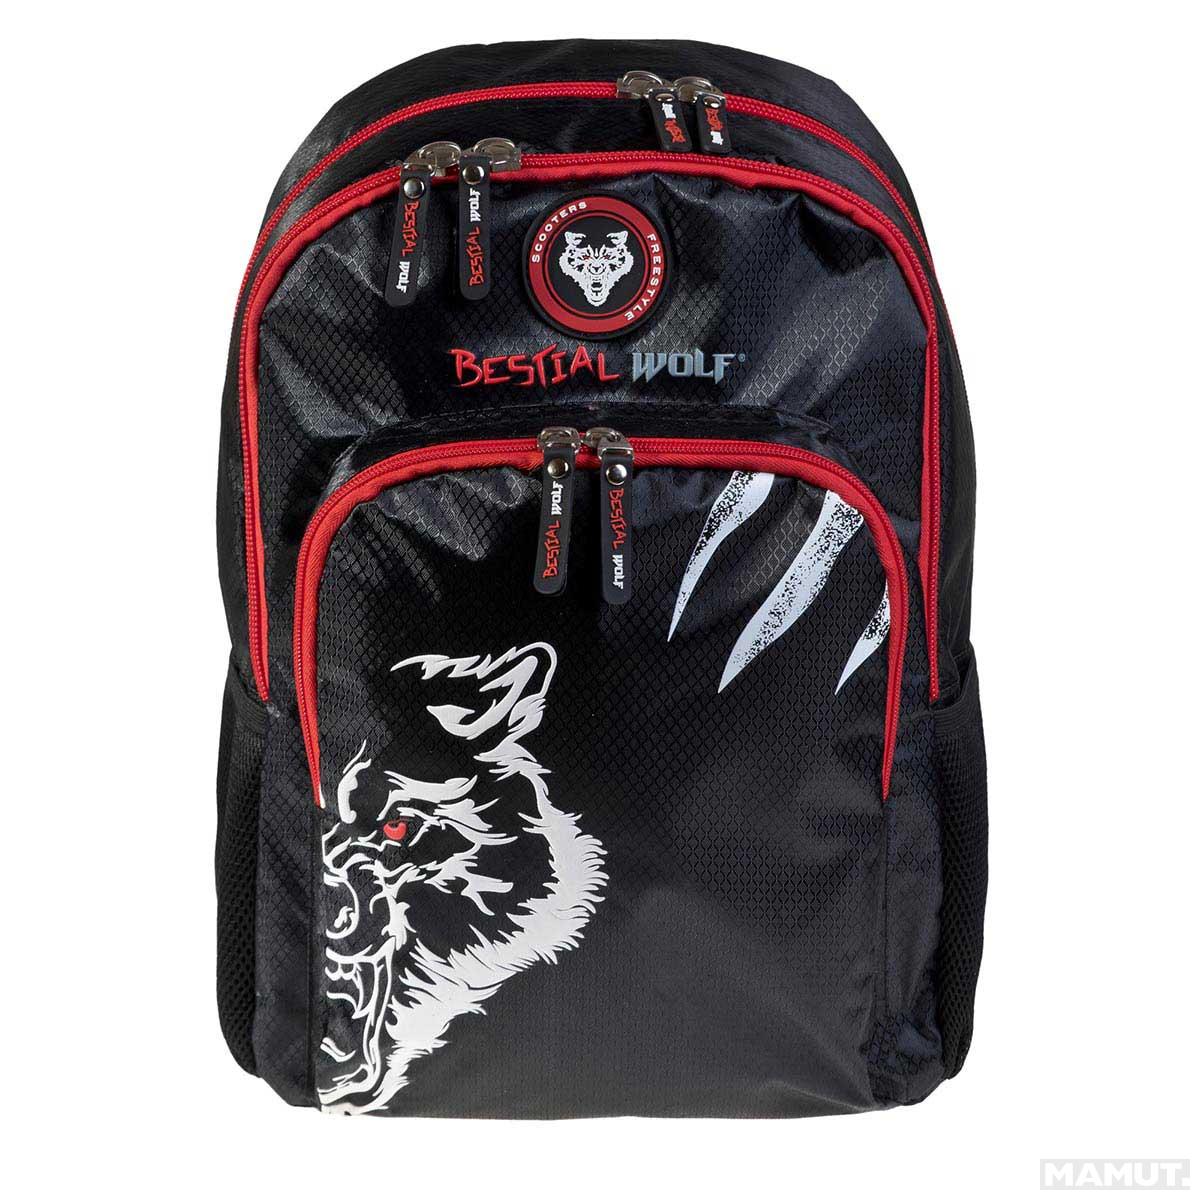 DOUBLE BACKPACK BESTIAL WOLF 